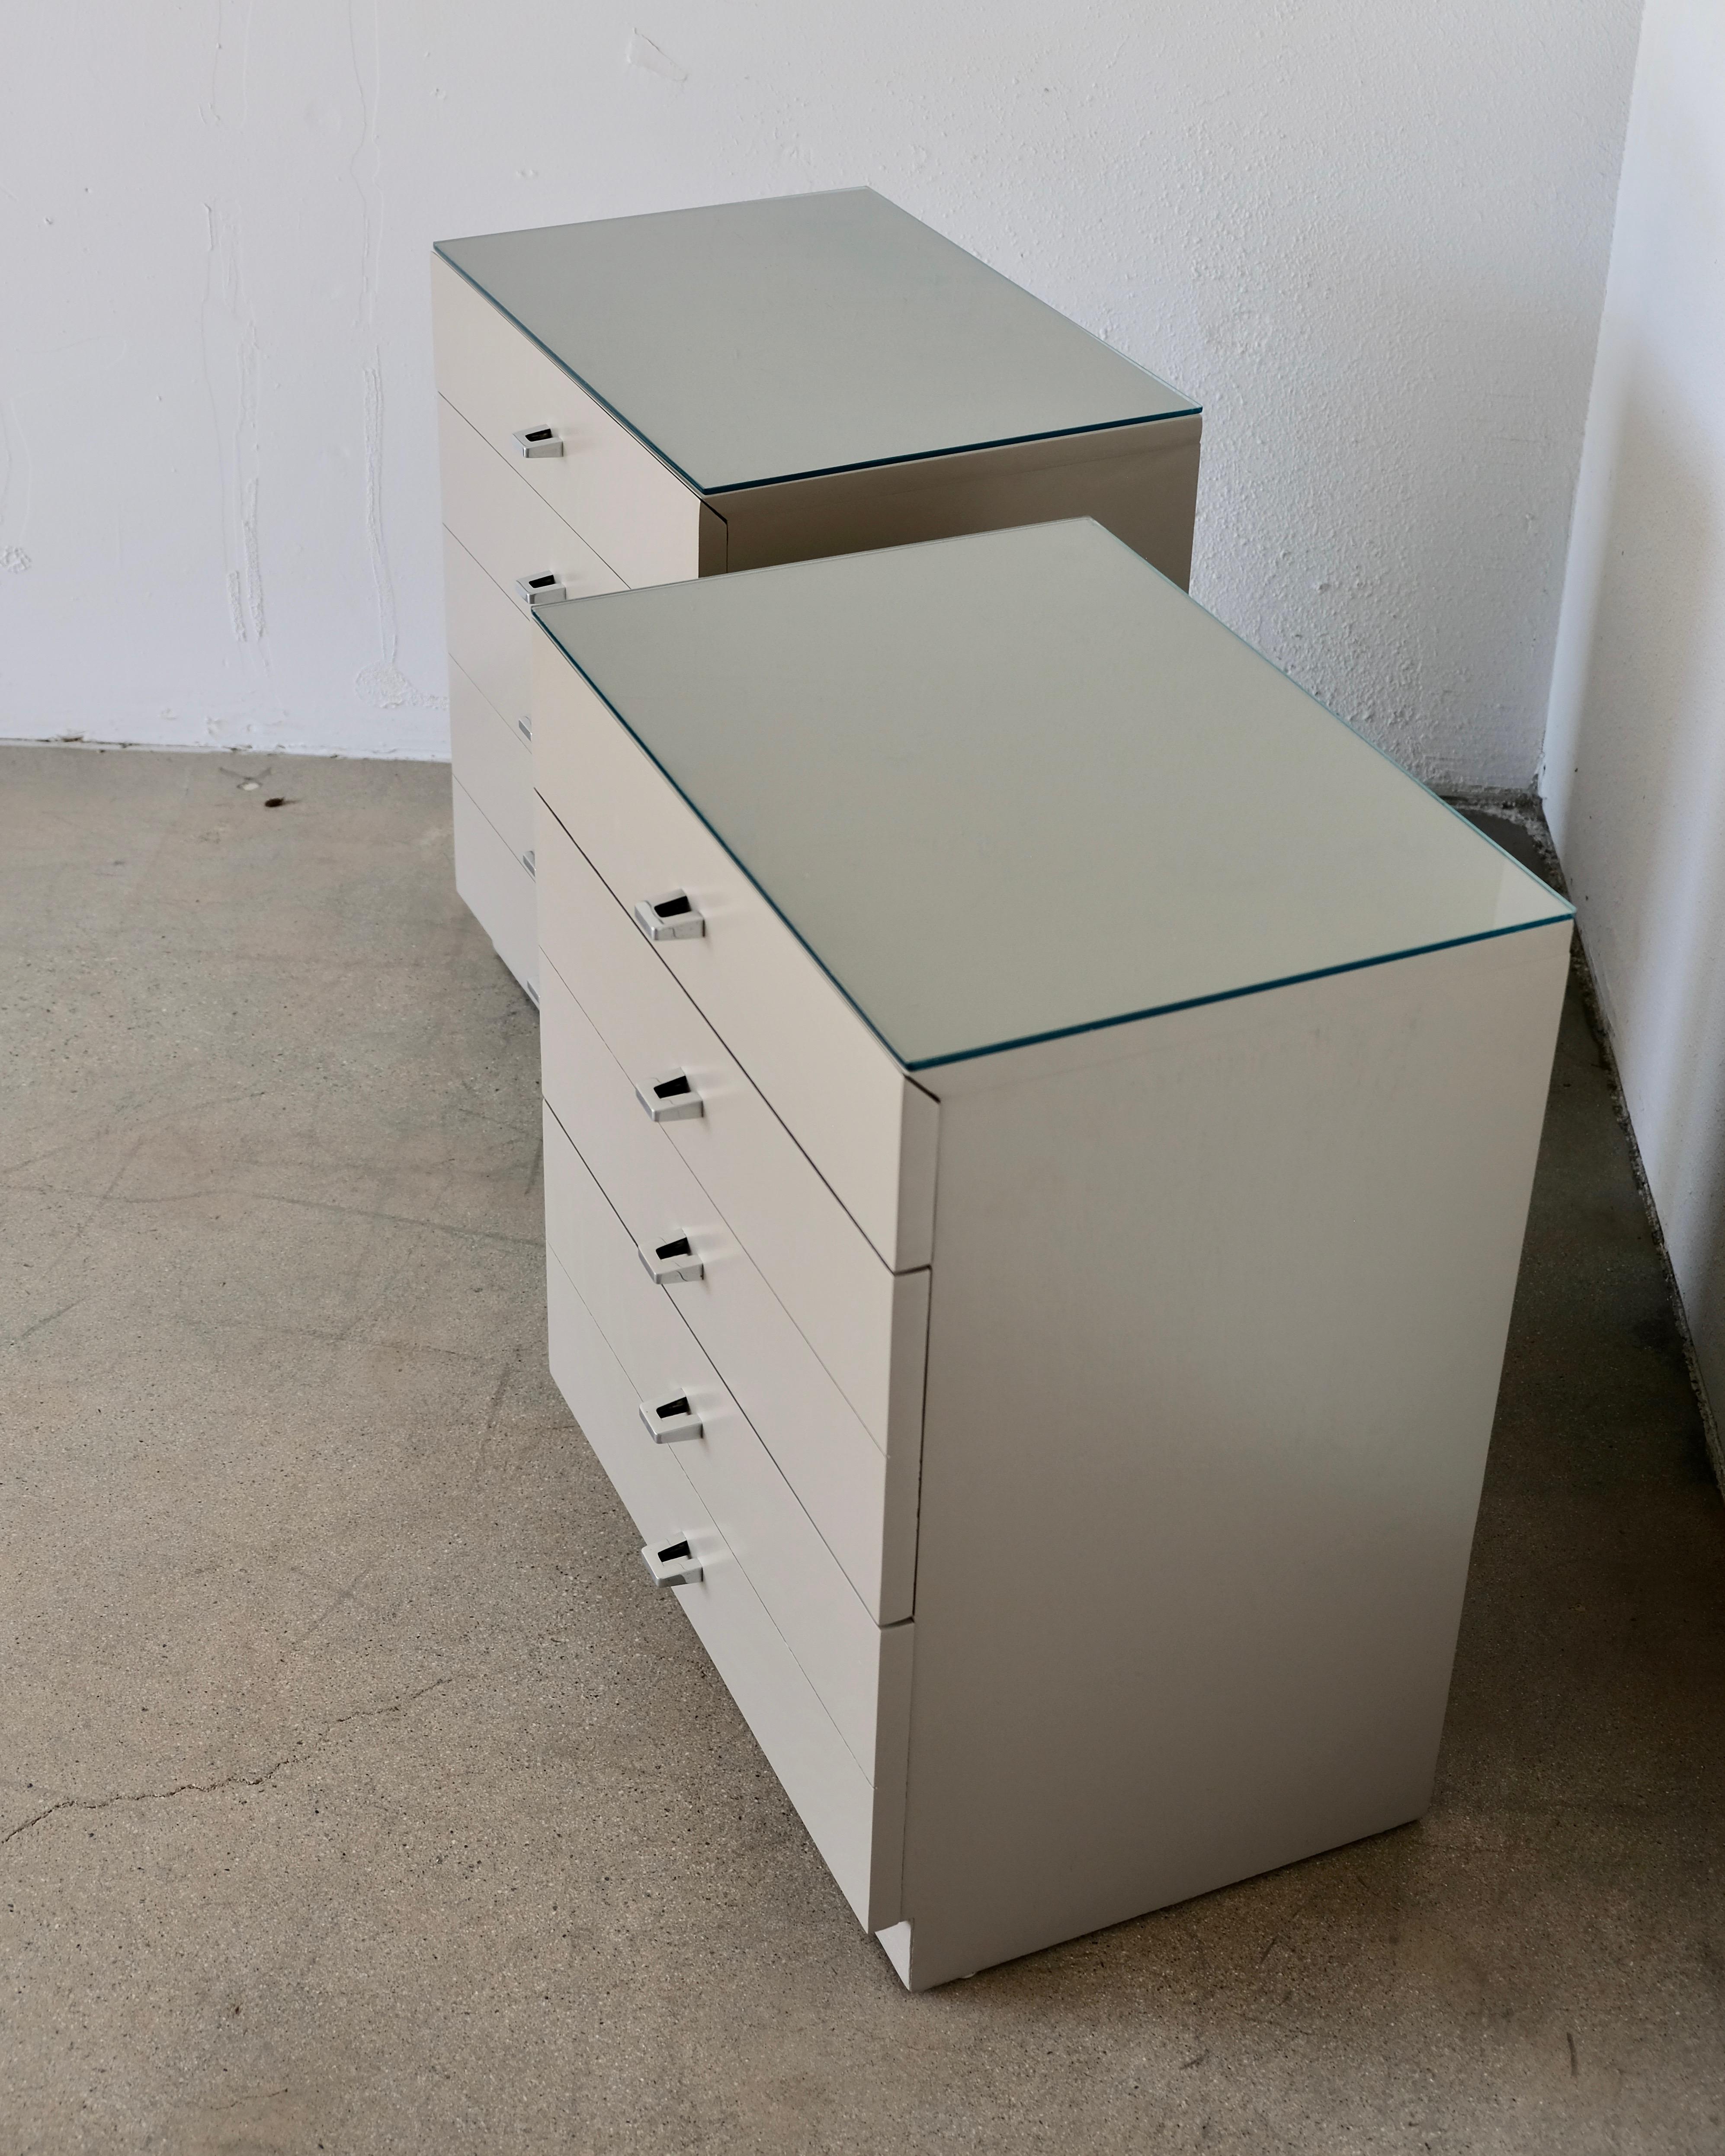 A pair of American of Martinsville bedside tables or nightstands that have been refinished in a light taupe. The original hardware has been professionally polished. 
Each chest has three drawers. The top drawer is more shallow while the bottom two